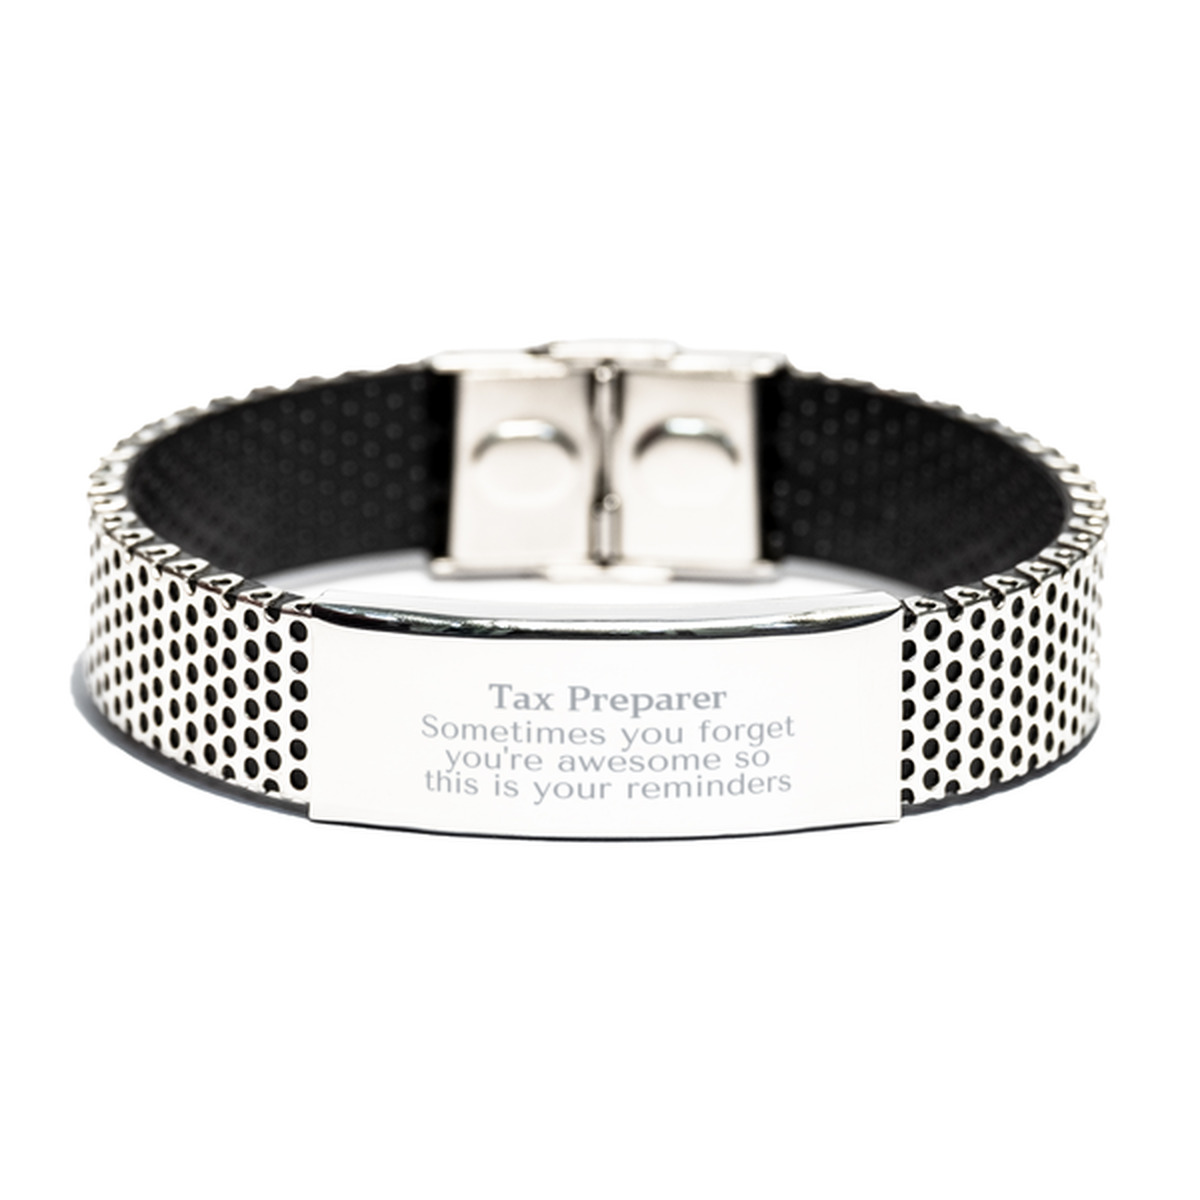 Sentimental Tax Preparer Stainless Steel Bracelet, Tax Preparer Sometimes you forget you're awesome so this is your reminders, Graduation Christmas Birthday Gifts for Tax Preparer, Men, Women, Coworkers